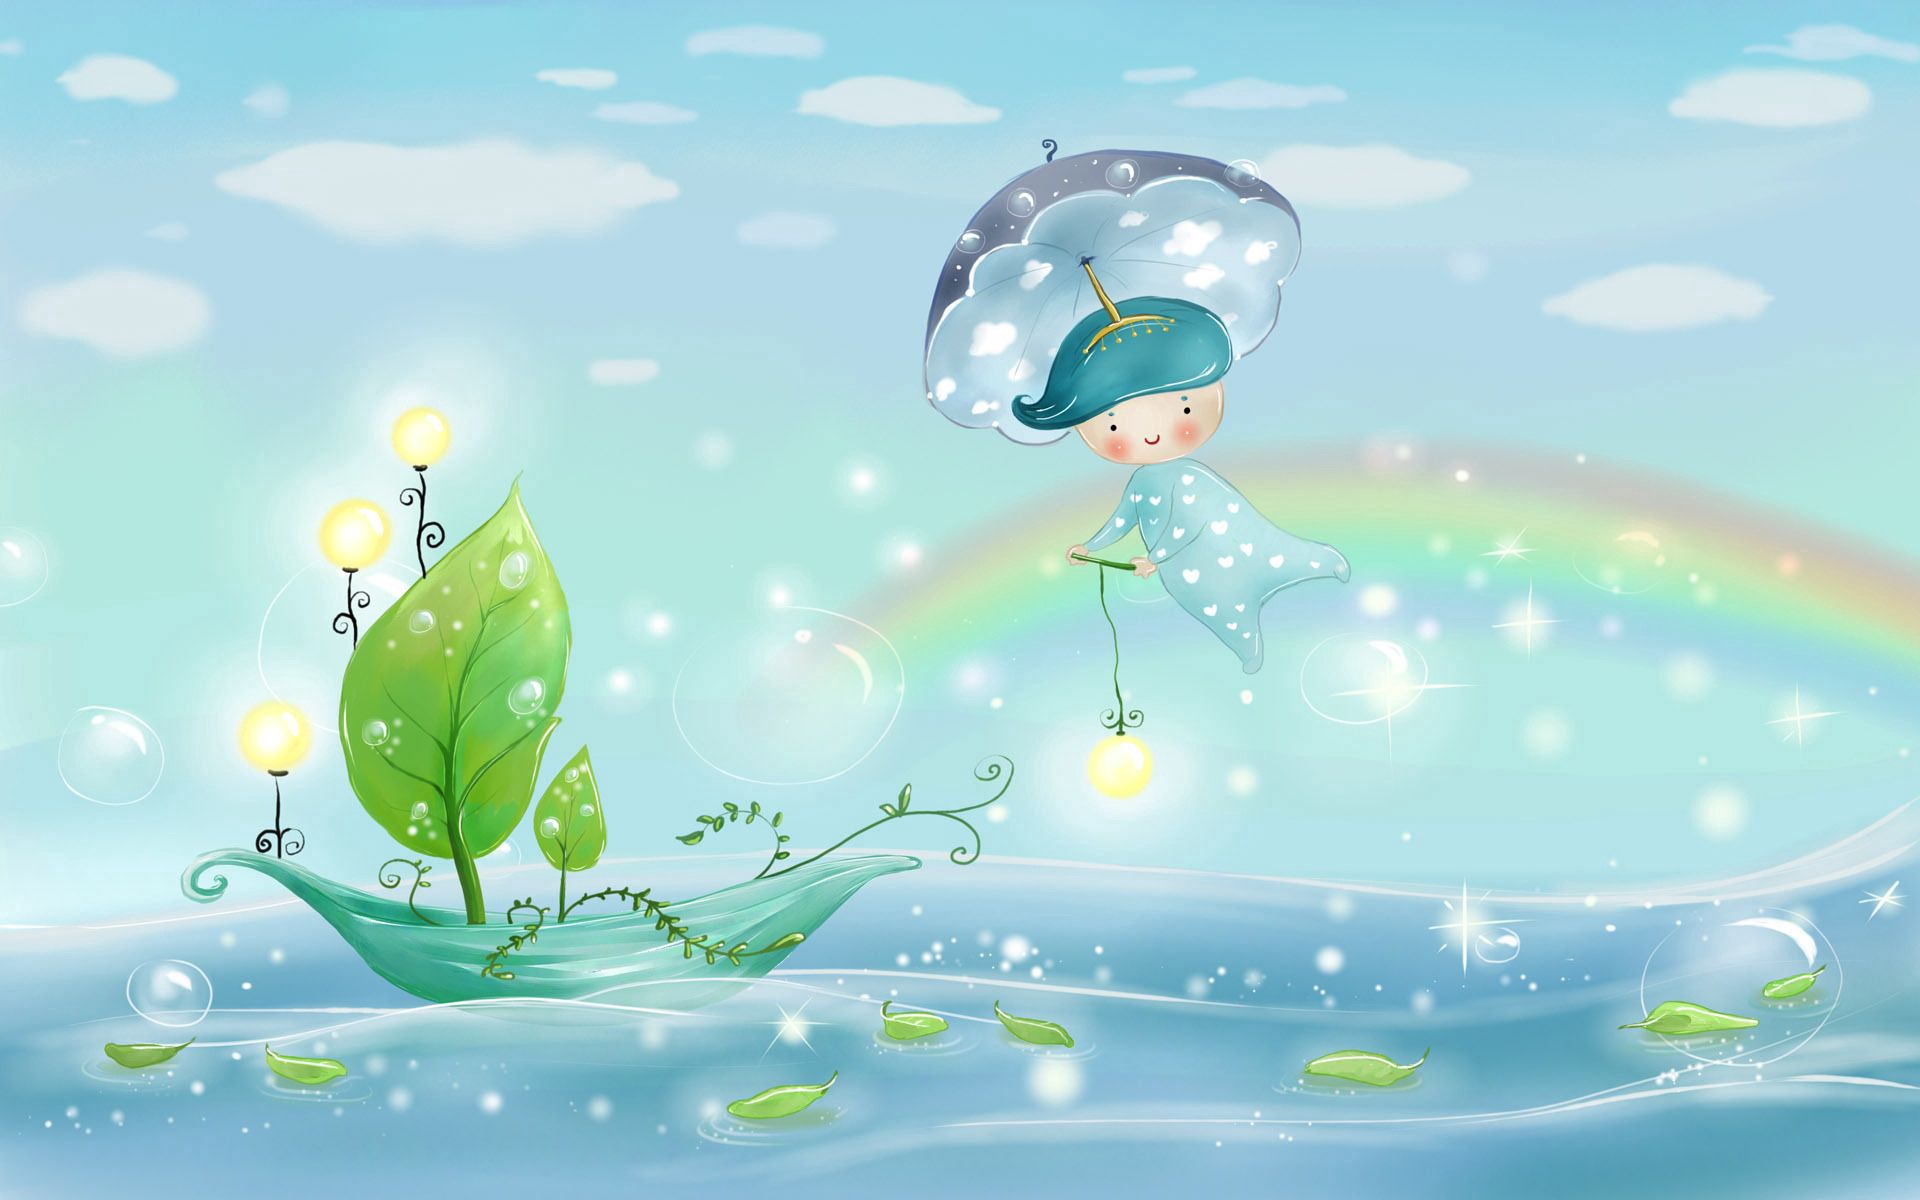 Free Images picture, drawing, sea, boy Umbrella